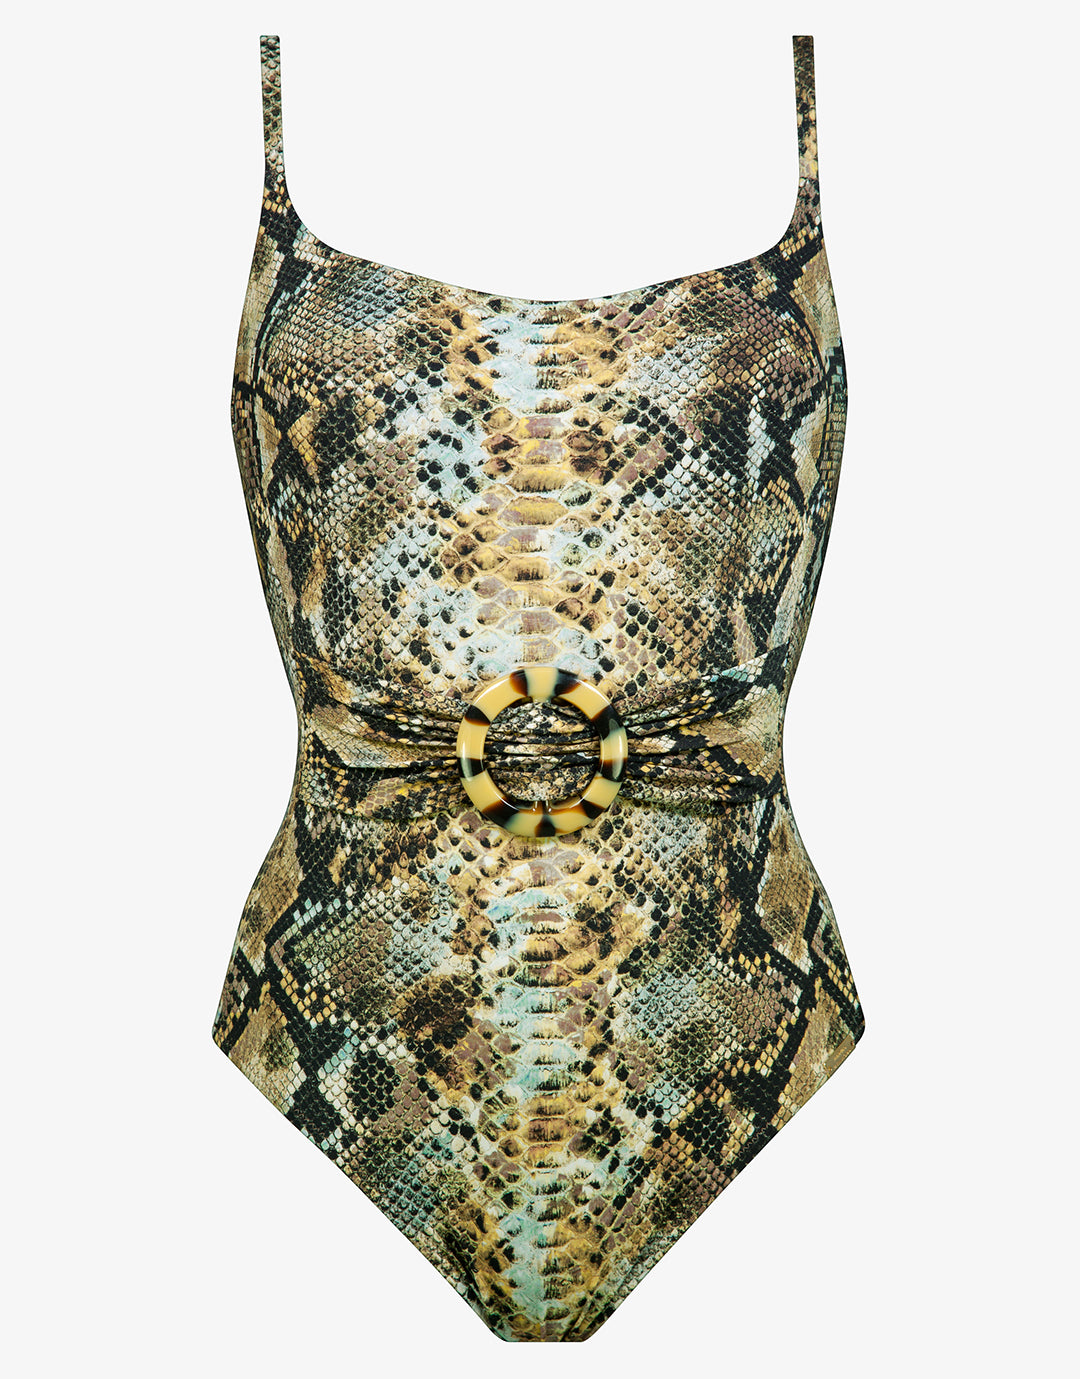 Serpent Underwired Ring Front Swimsuit - Python - Simply Beach UK